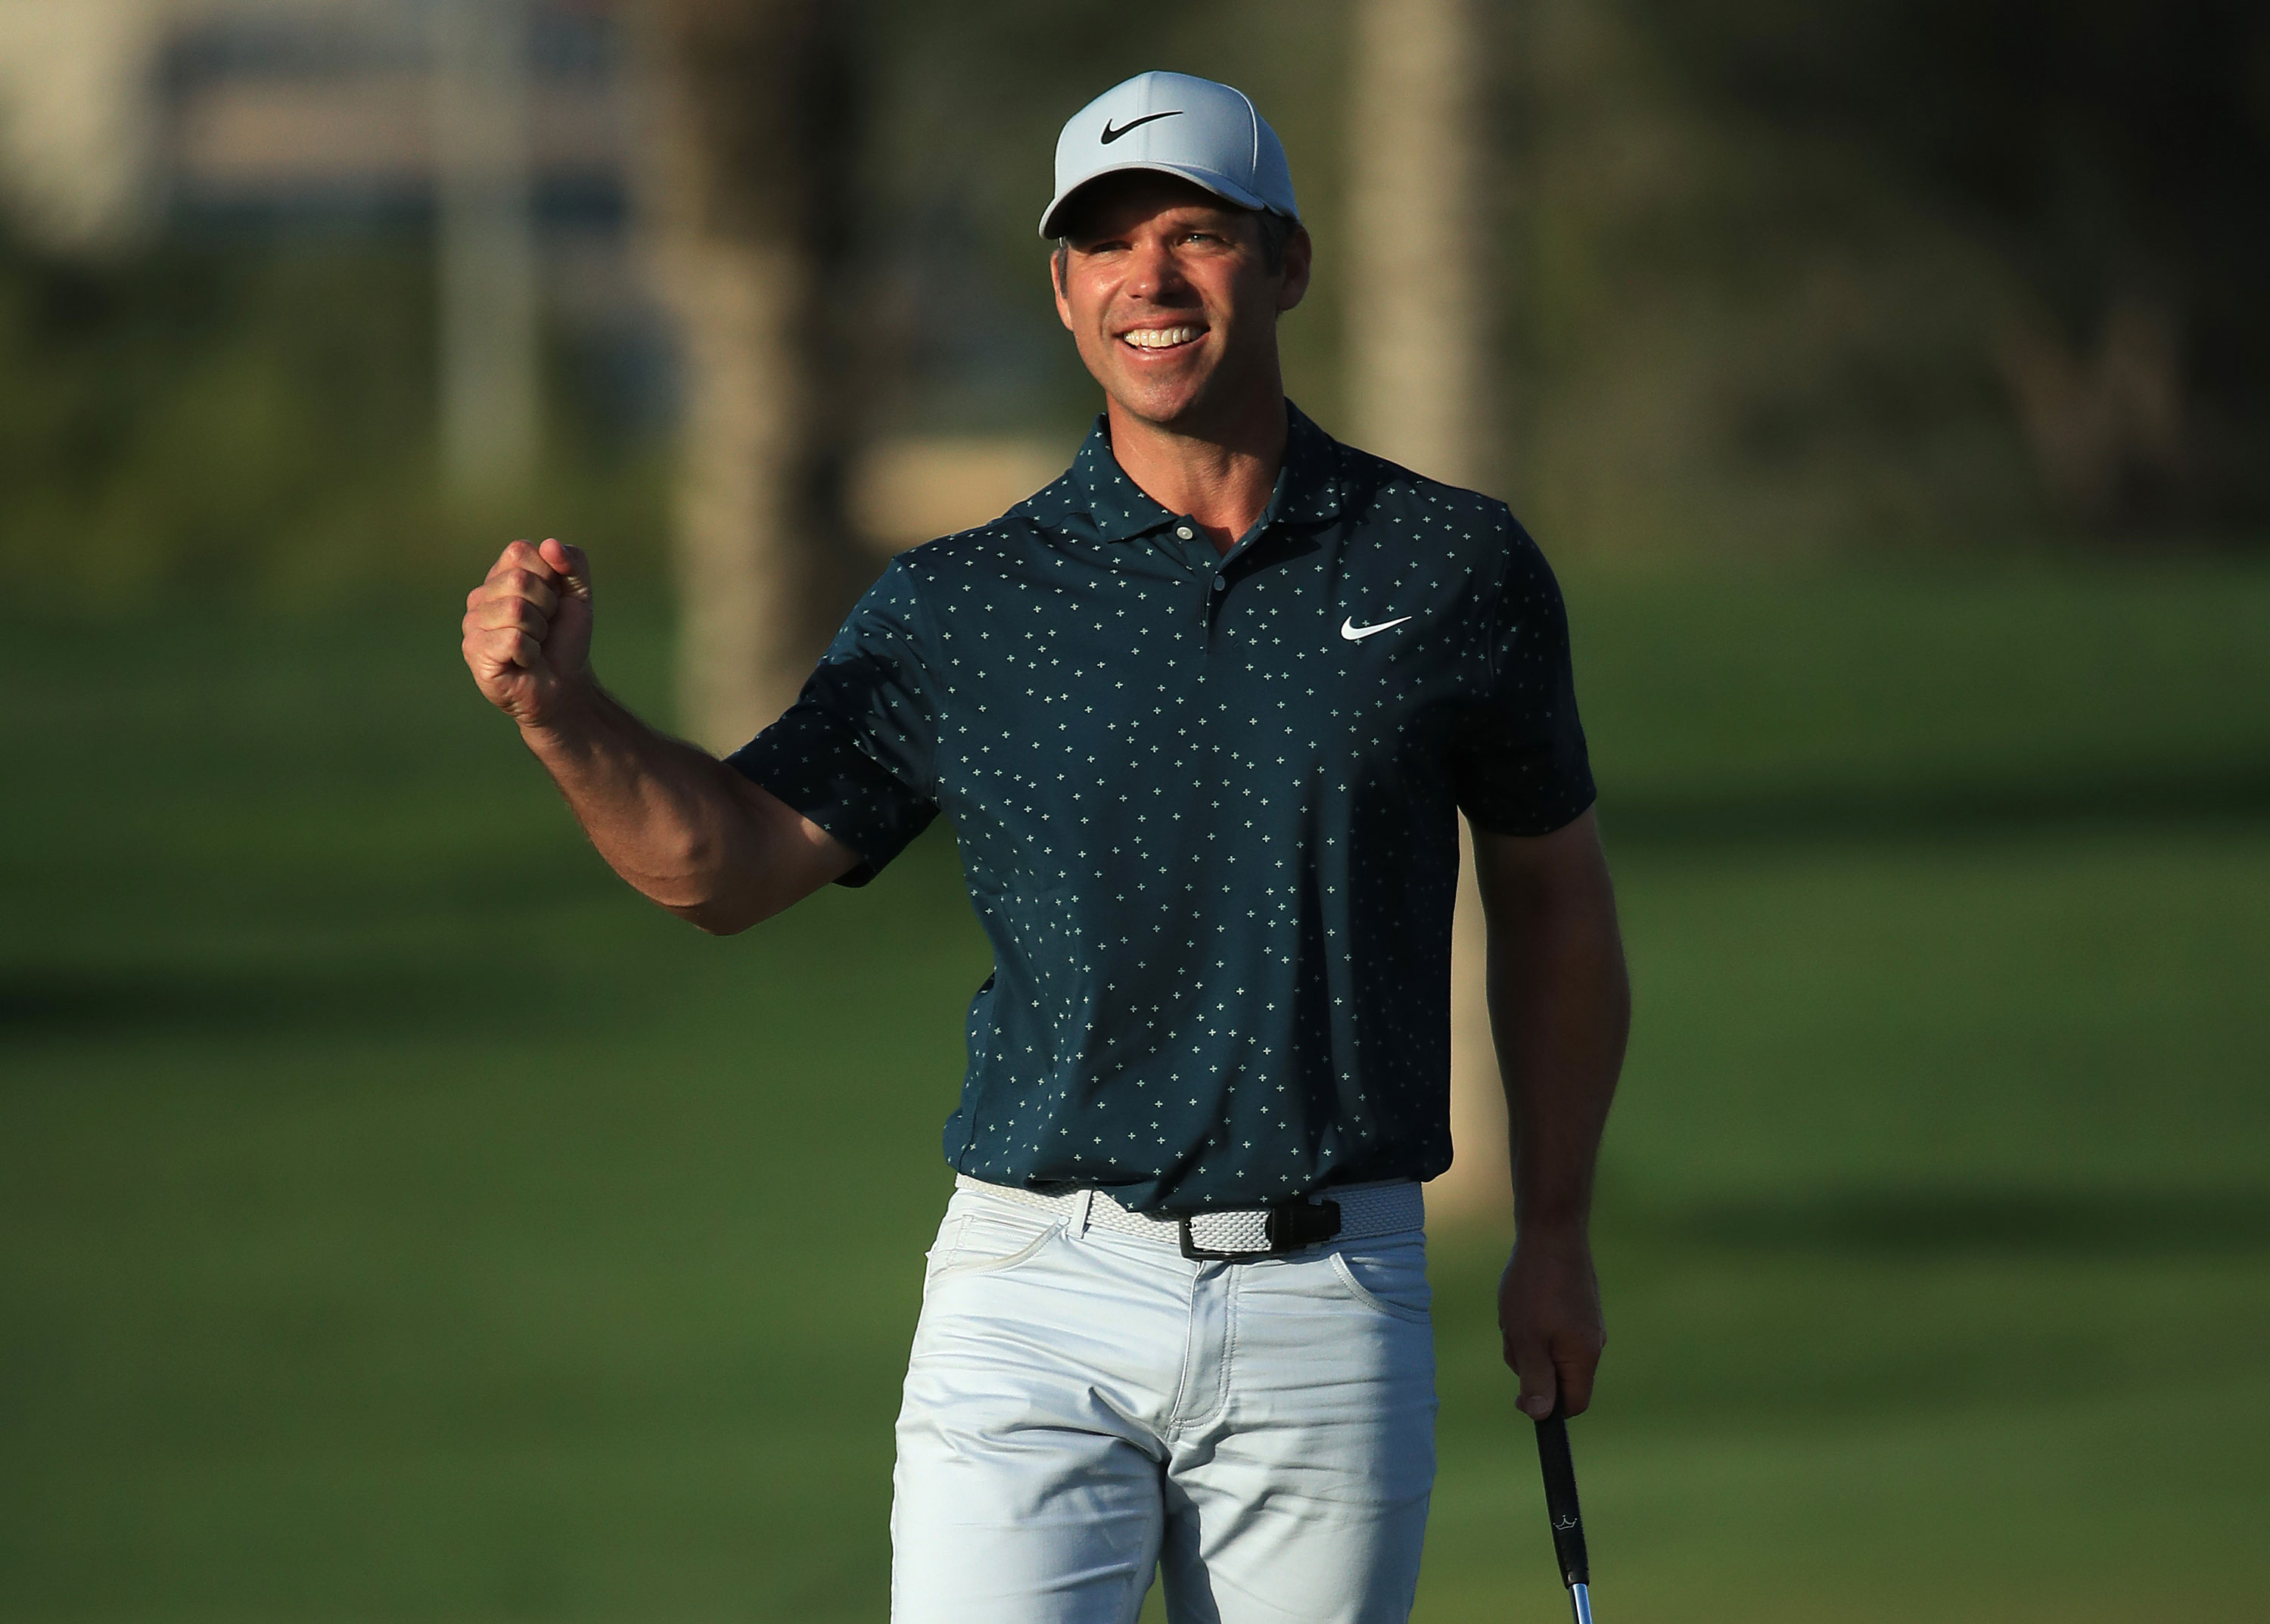 An emotional Paul Casey explains why his 15th European Tour title has added  meaning | Golf News and Tour Information | GolfDigest.com